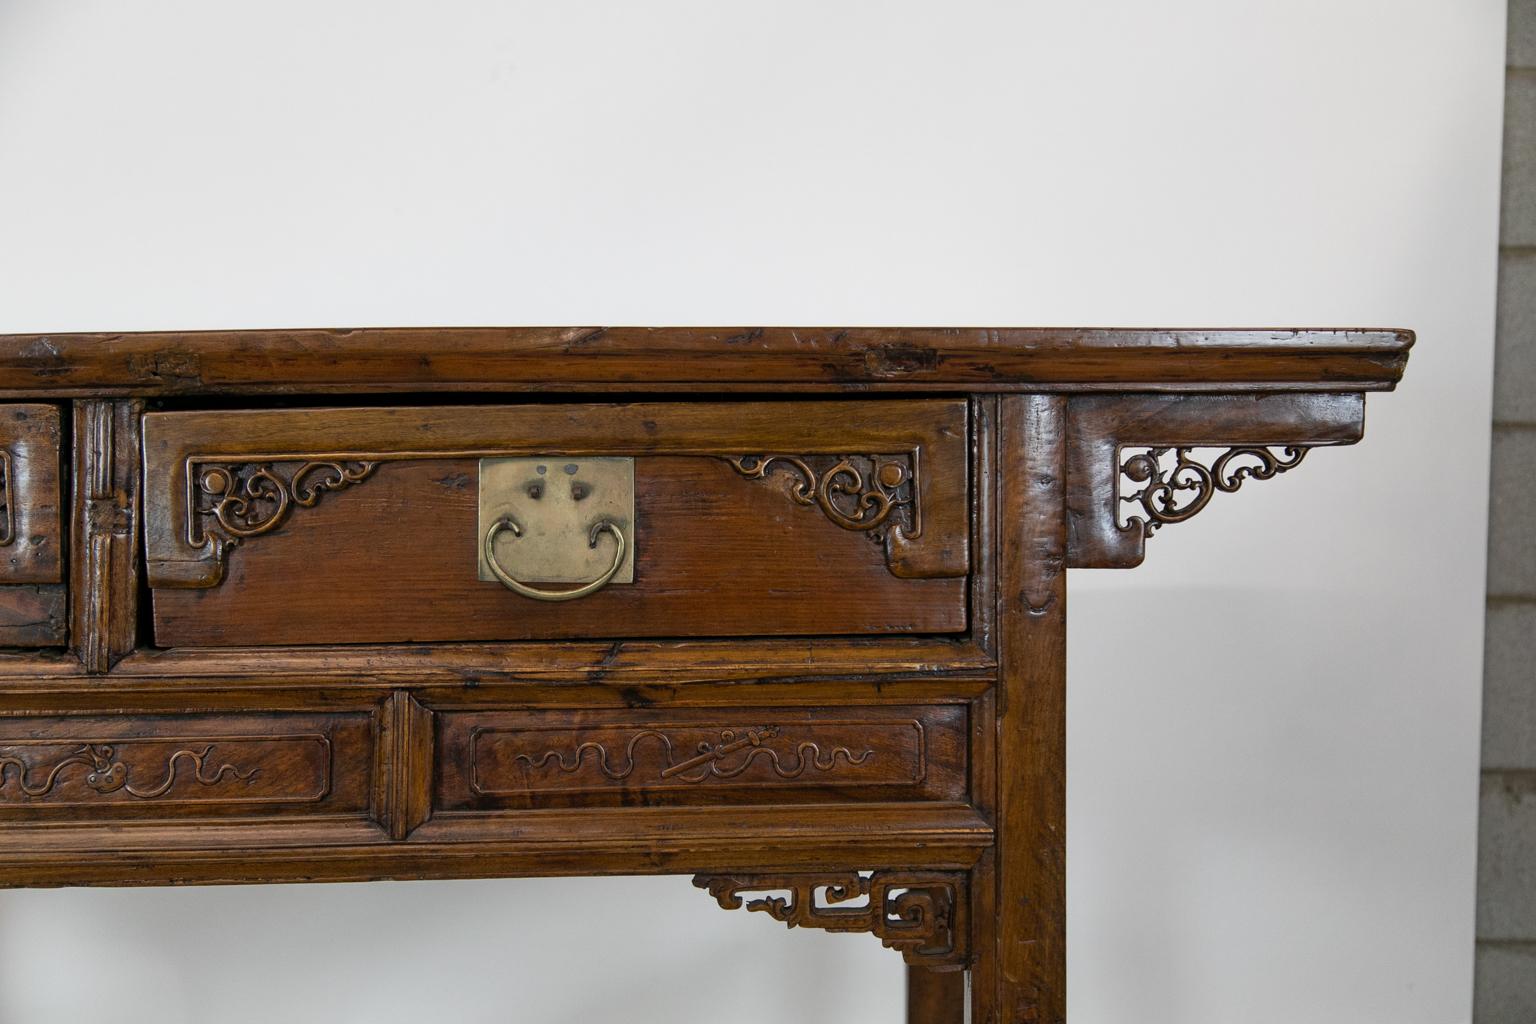 This altar table is made of Asian fruitwood and has carved Asian panels in the drawers and supporting panels. The panels below the drawers conceal hidden compartments that can only be accessed by removing the drawers.